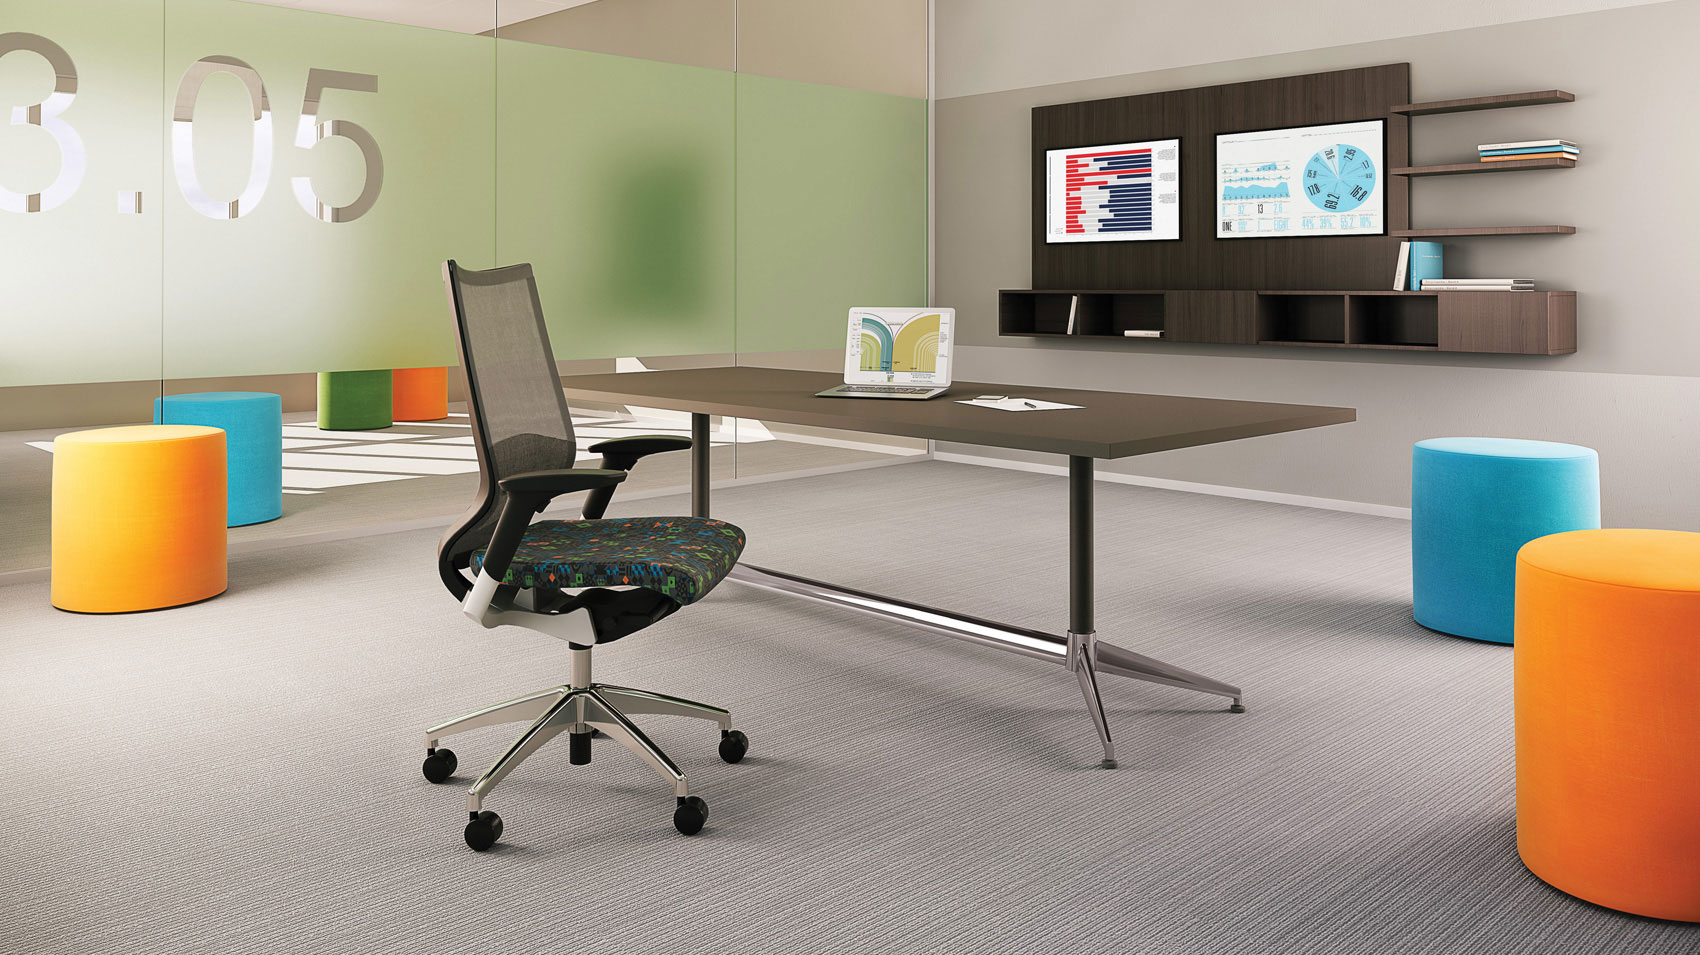 First Office With Pretentious First Office Furniture Visualized With Colorful Round Puffs And Elegant Swivel Chair Furniture Exquisite Office Furniture Designs By First Office